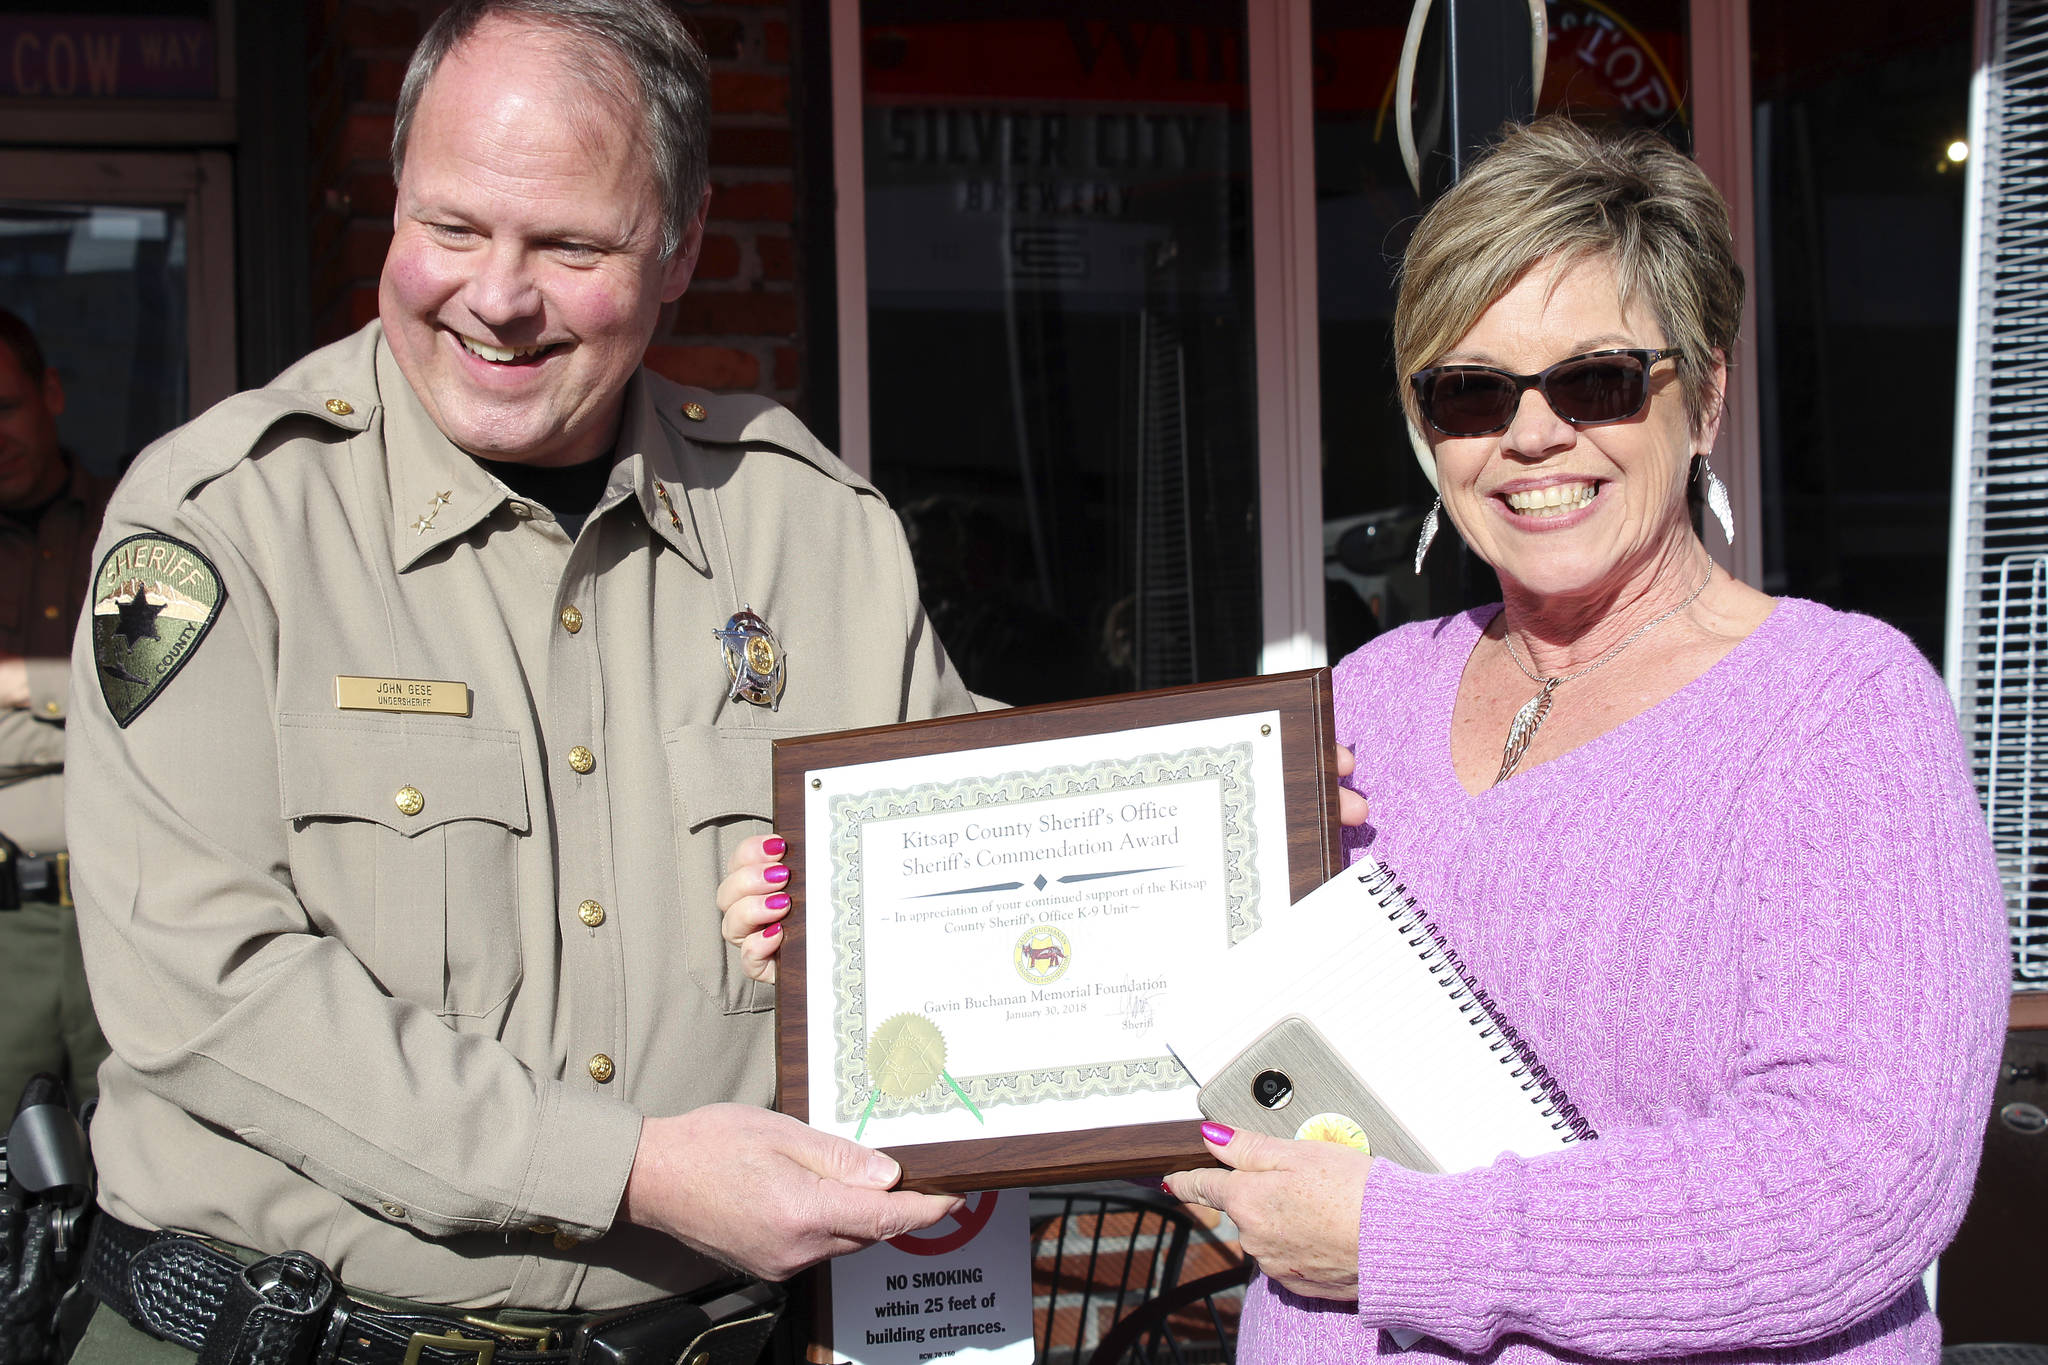 Kitsap County Sheriff’s Undersheriff John Gese presents Bill and Susie Slankard with a KCSO Commendation award. (Michelle Beahm | Kitsap Daily News)